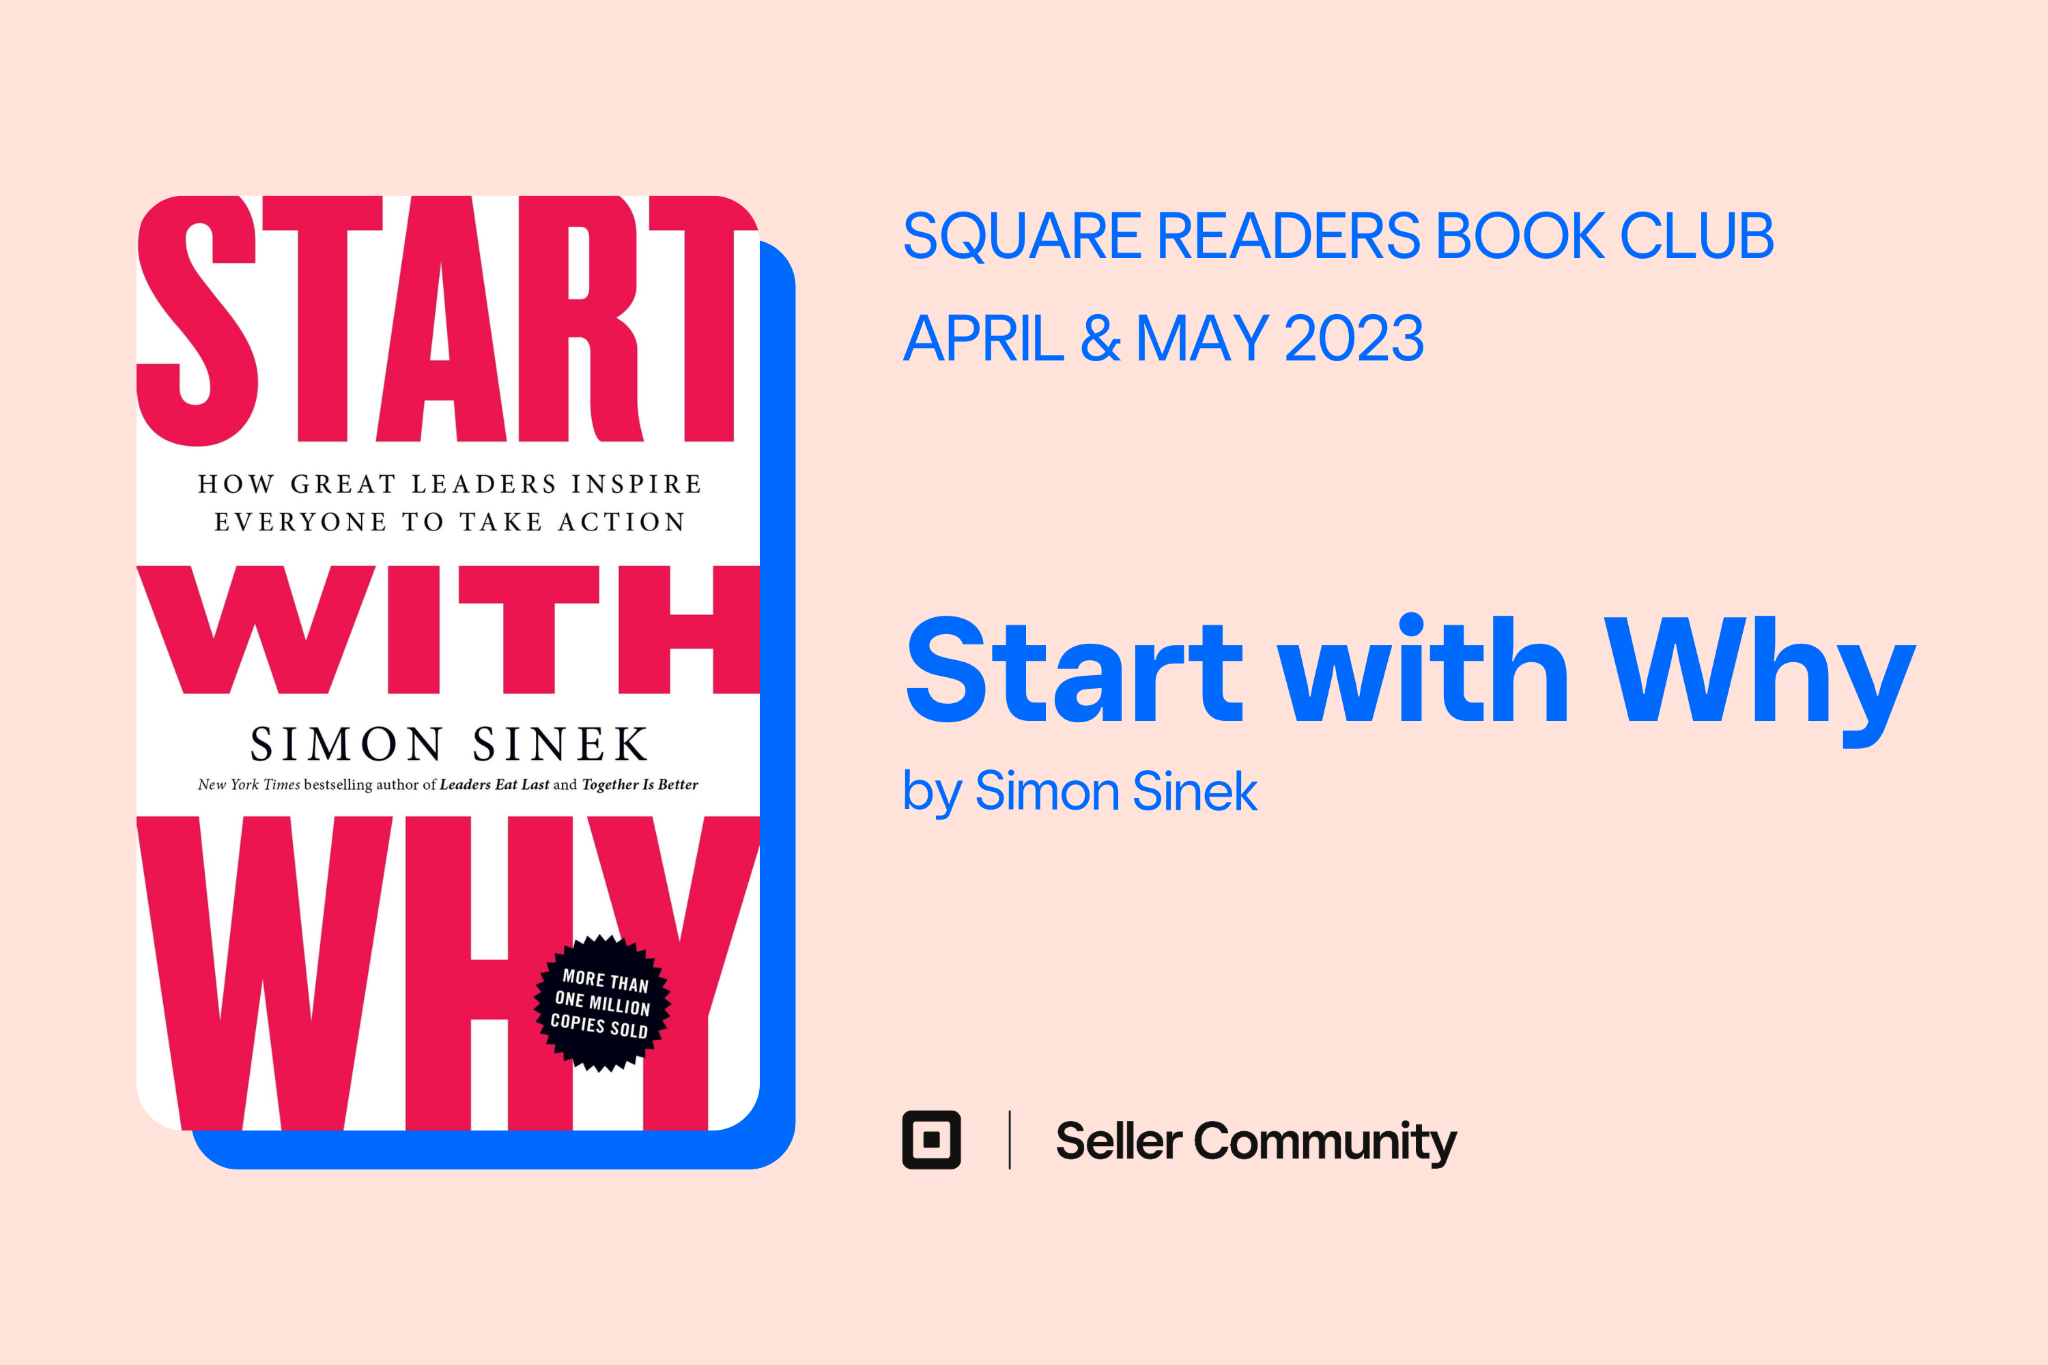 Start with Why: Full Book Summary - The Seller Community